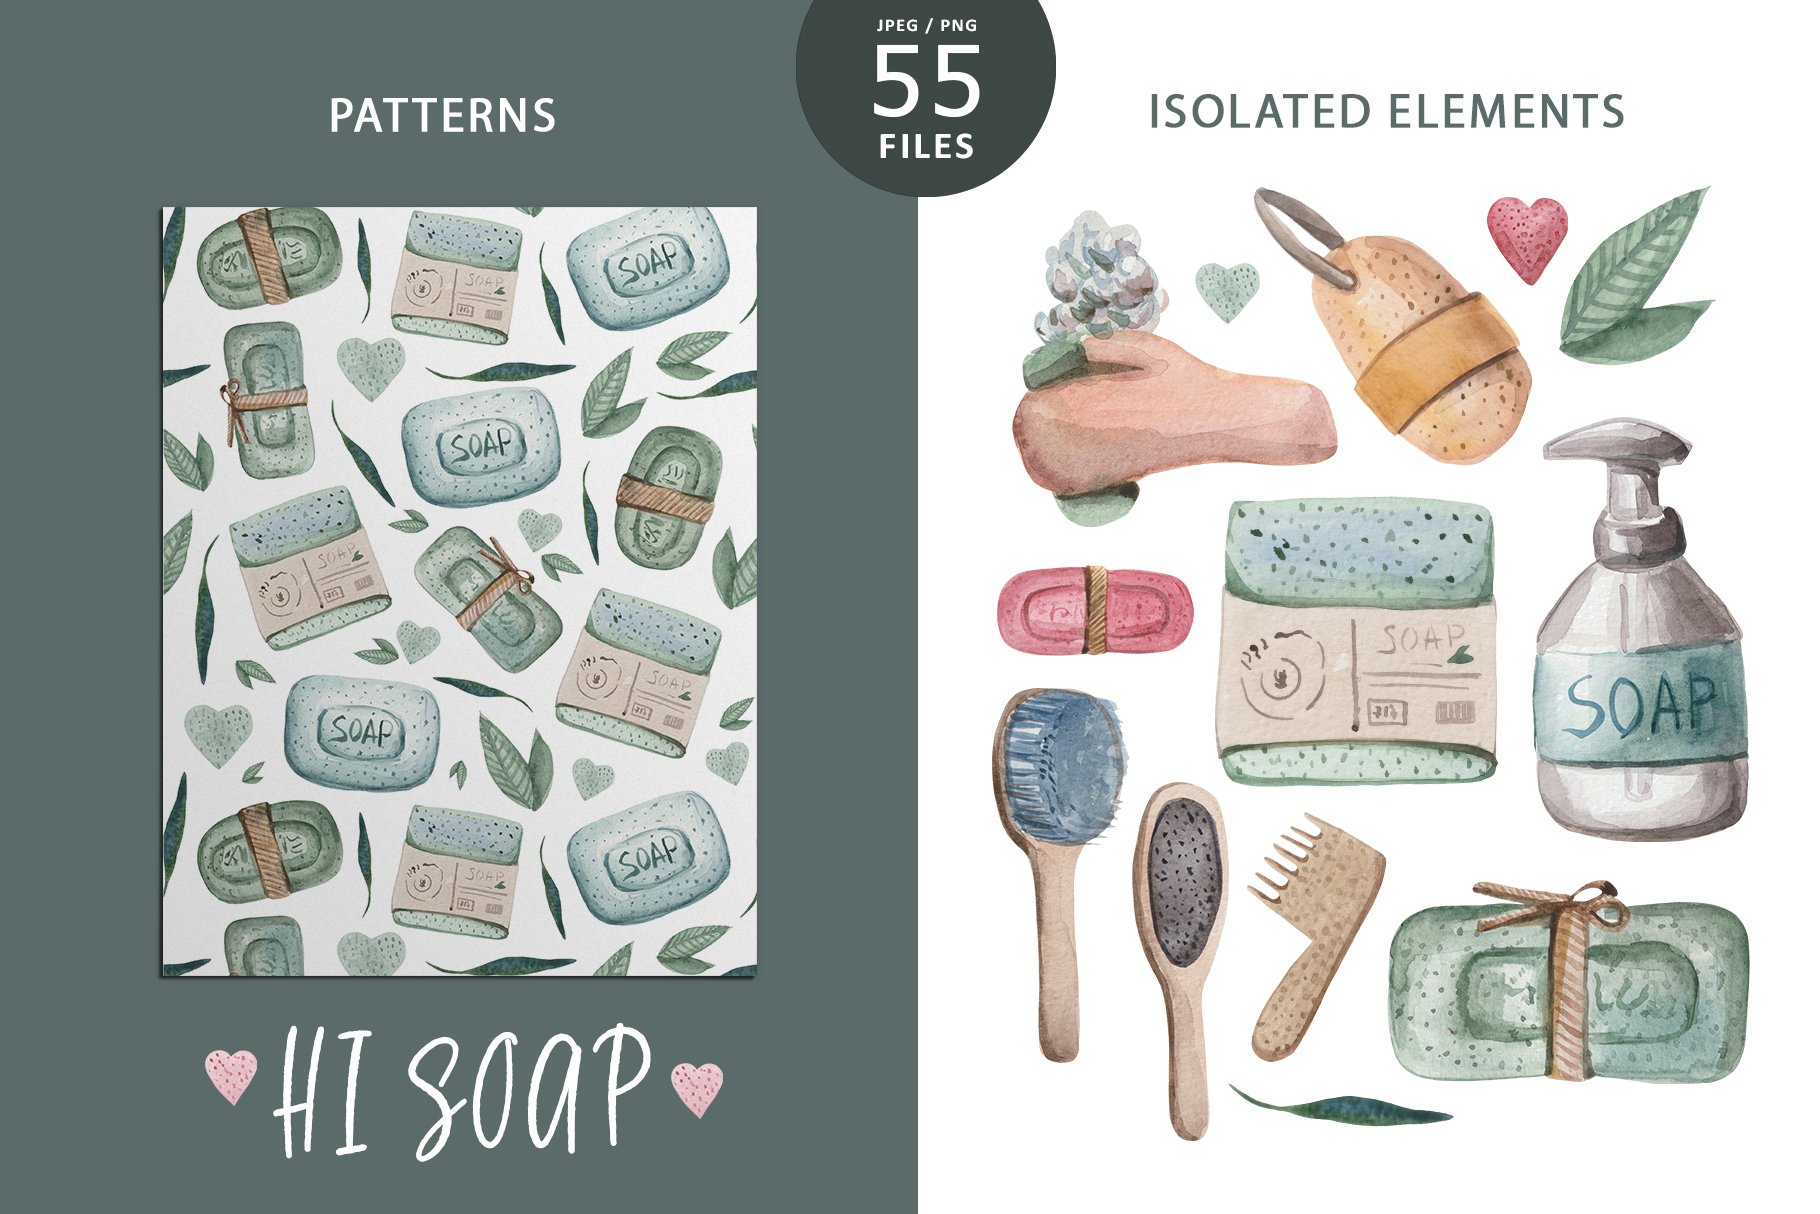 Soap, combs, slippers and more.